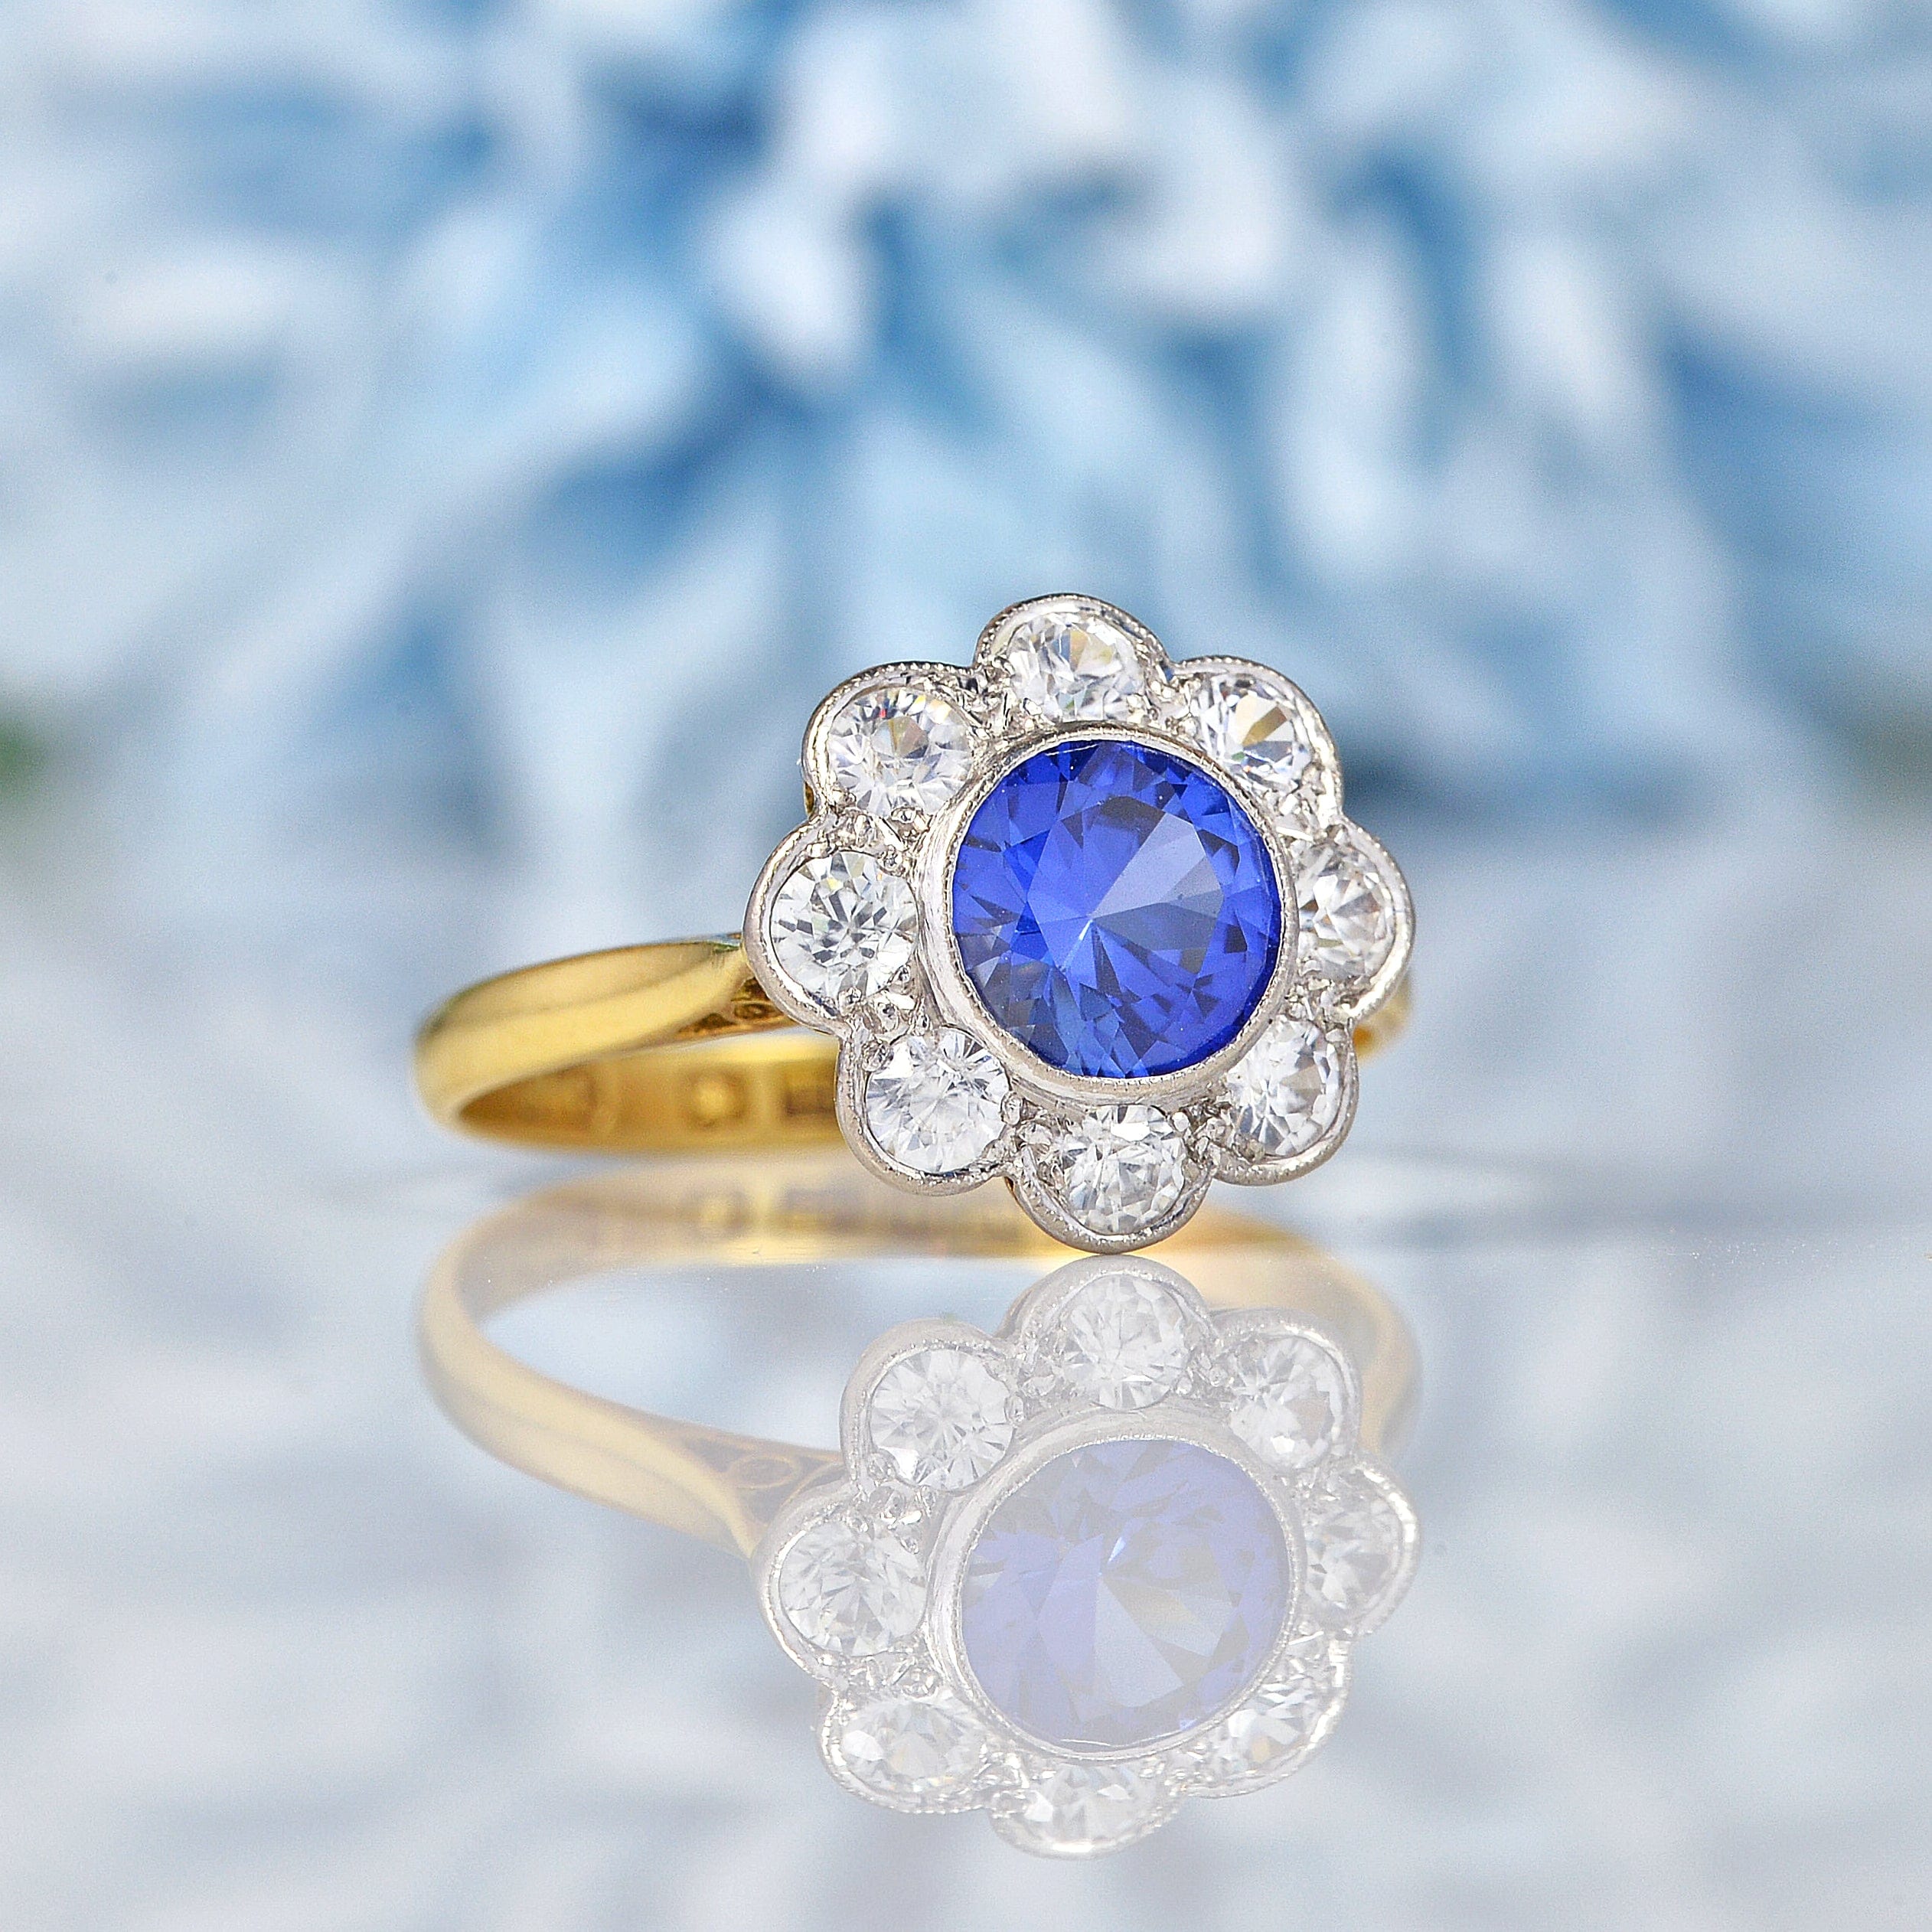 Ellibelle Jewellery Vintage 1950s Blue Sapphire 18ct Gold Daisy Cluster Ring